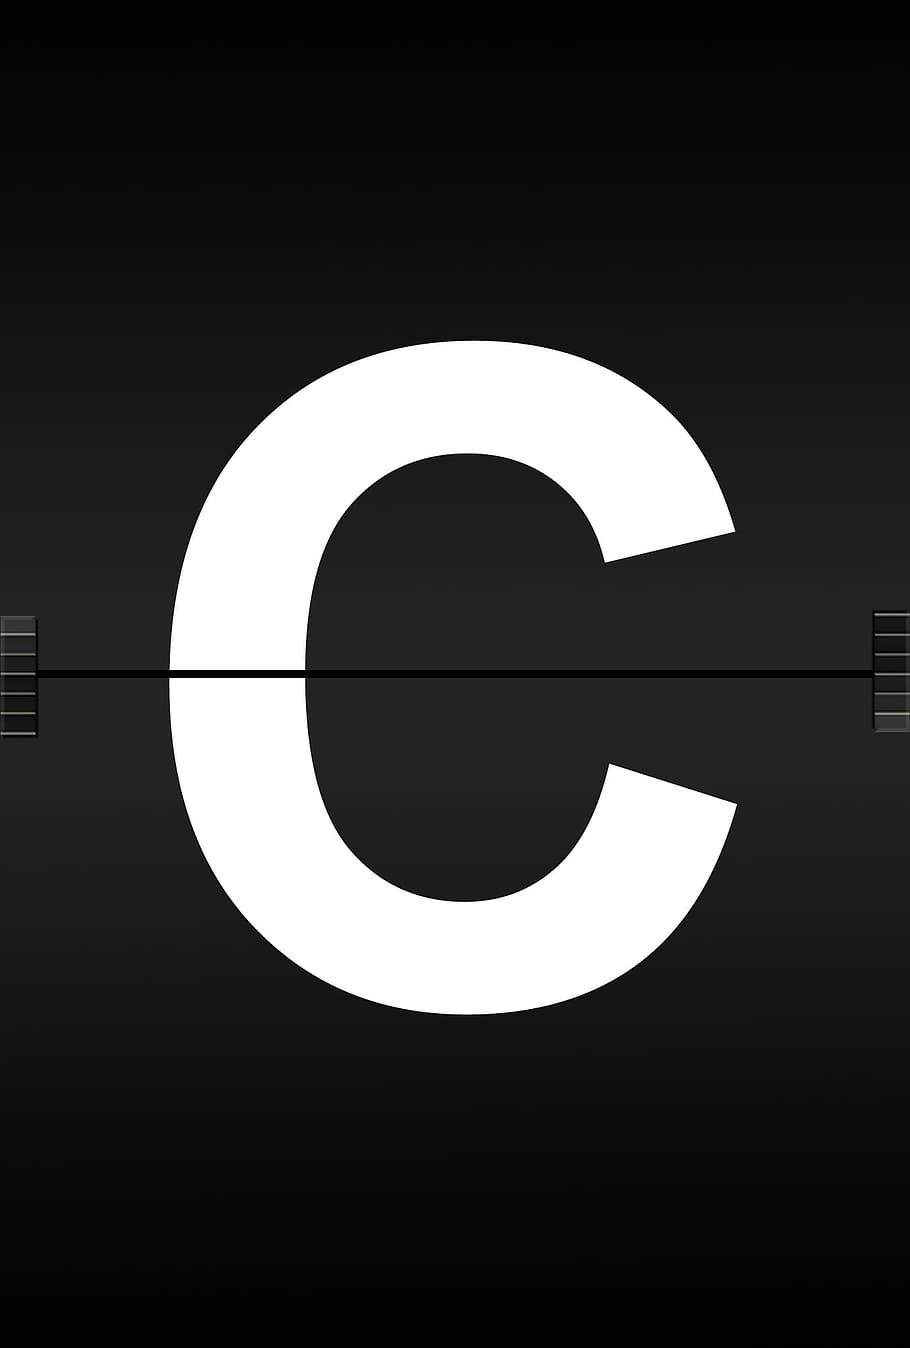 Letter C Wallpapers  Wallpaper Cave